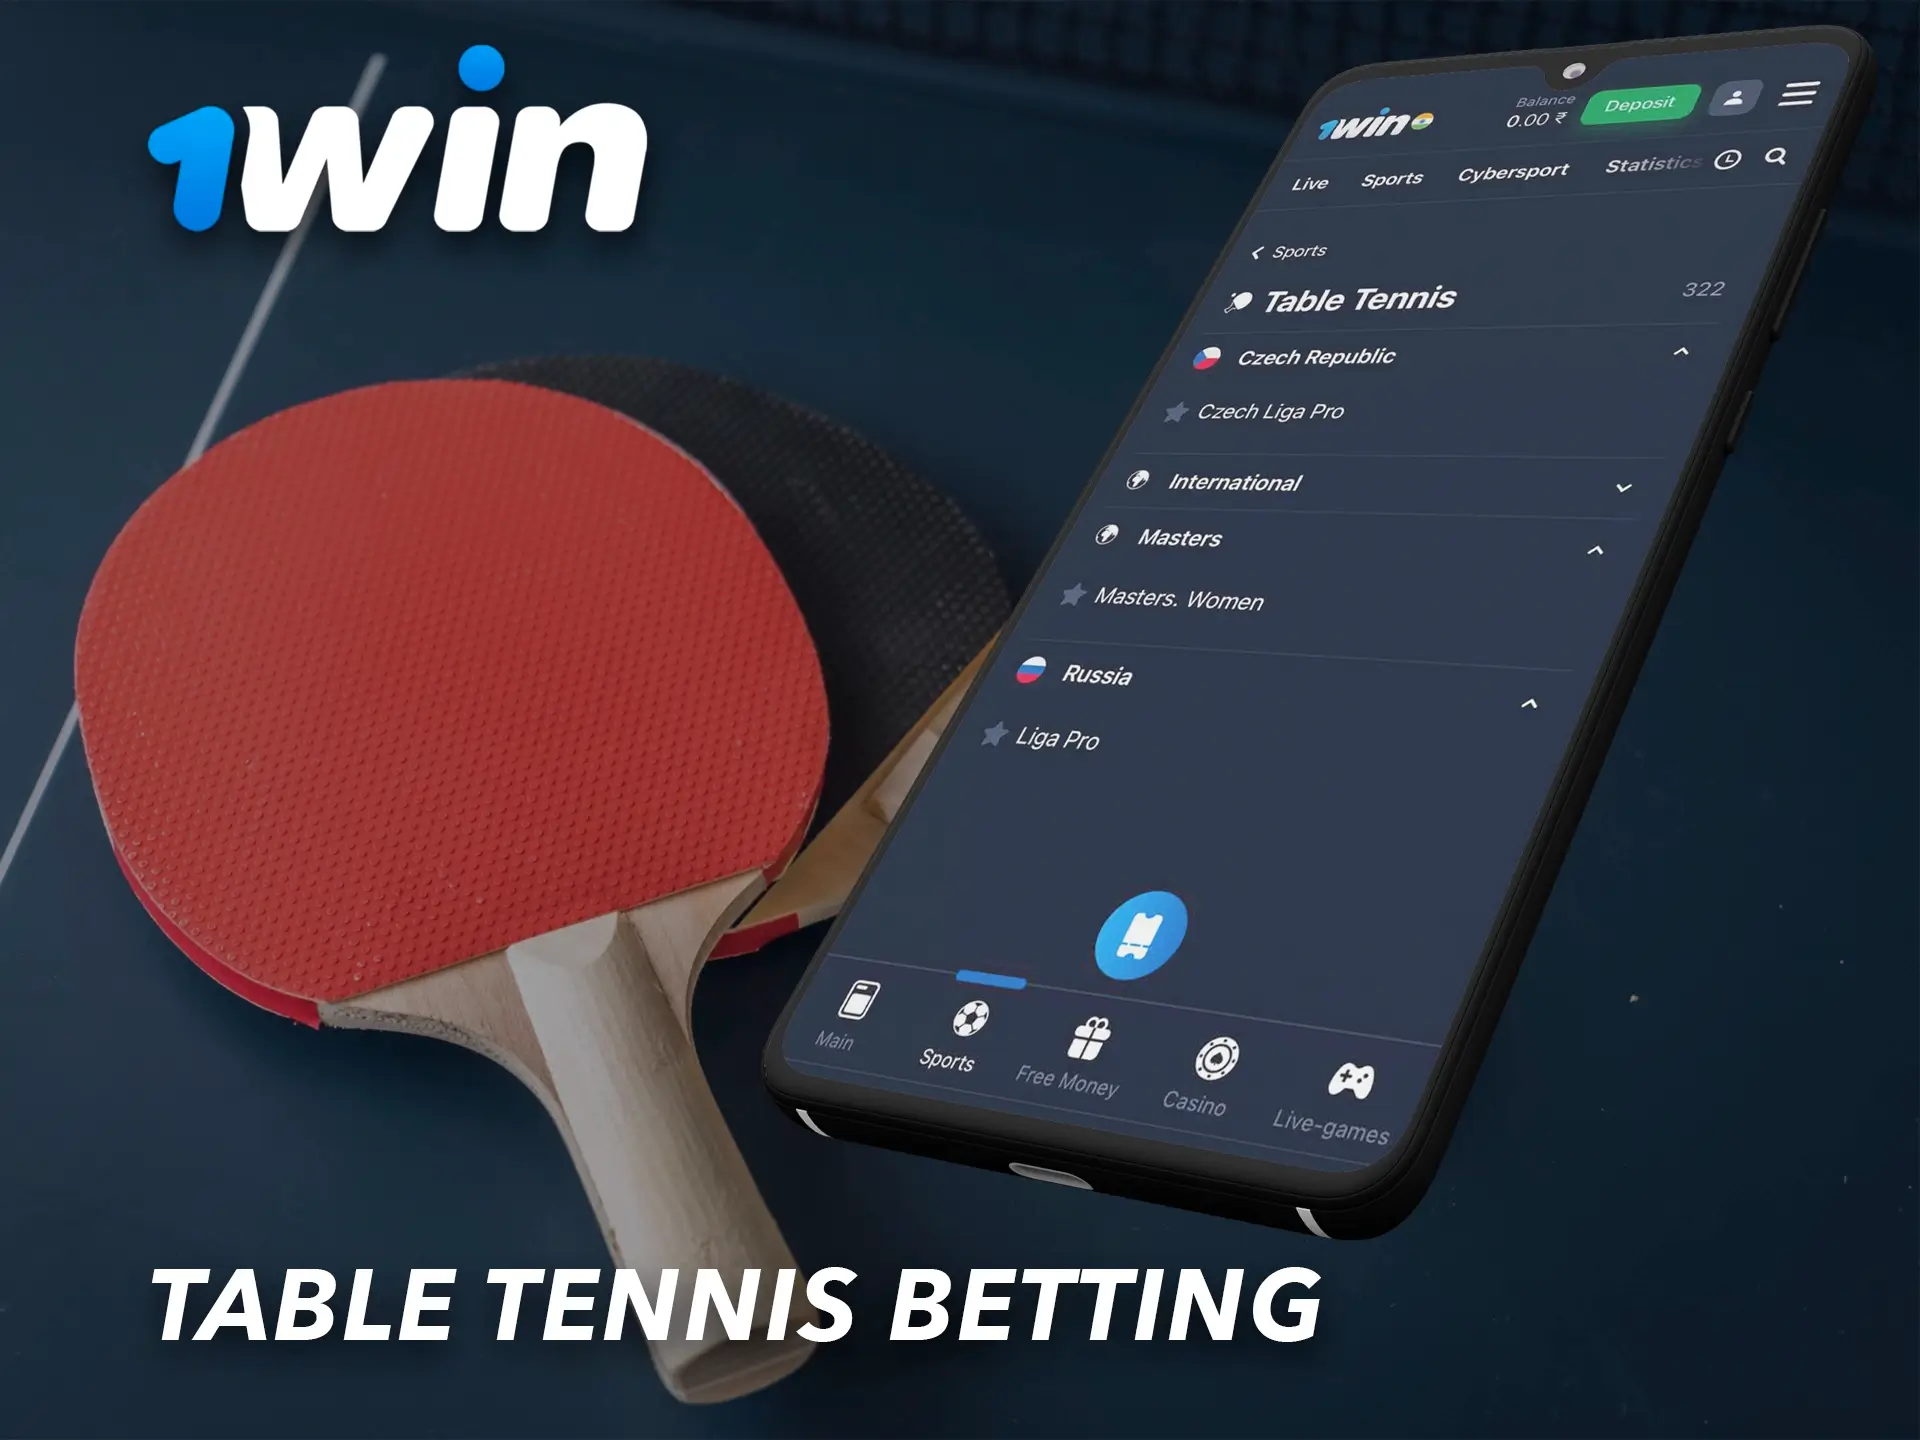 Reaction is very important in table tennis, show your skill and make an accurate prediction on the outcome of the match at 1Win.